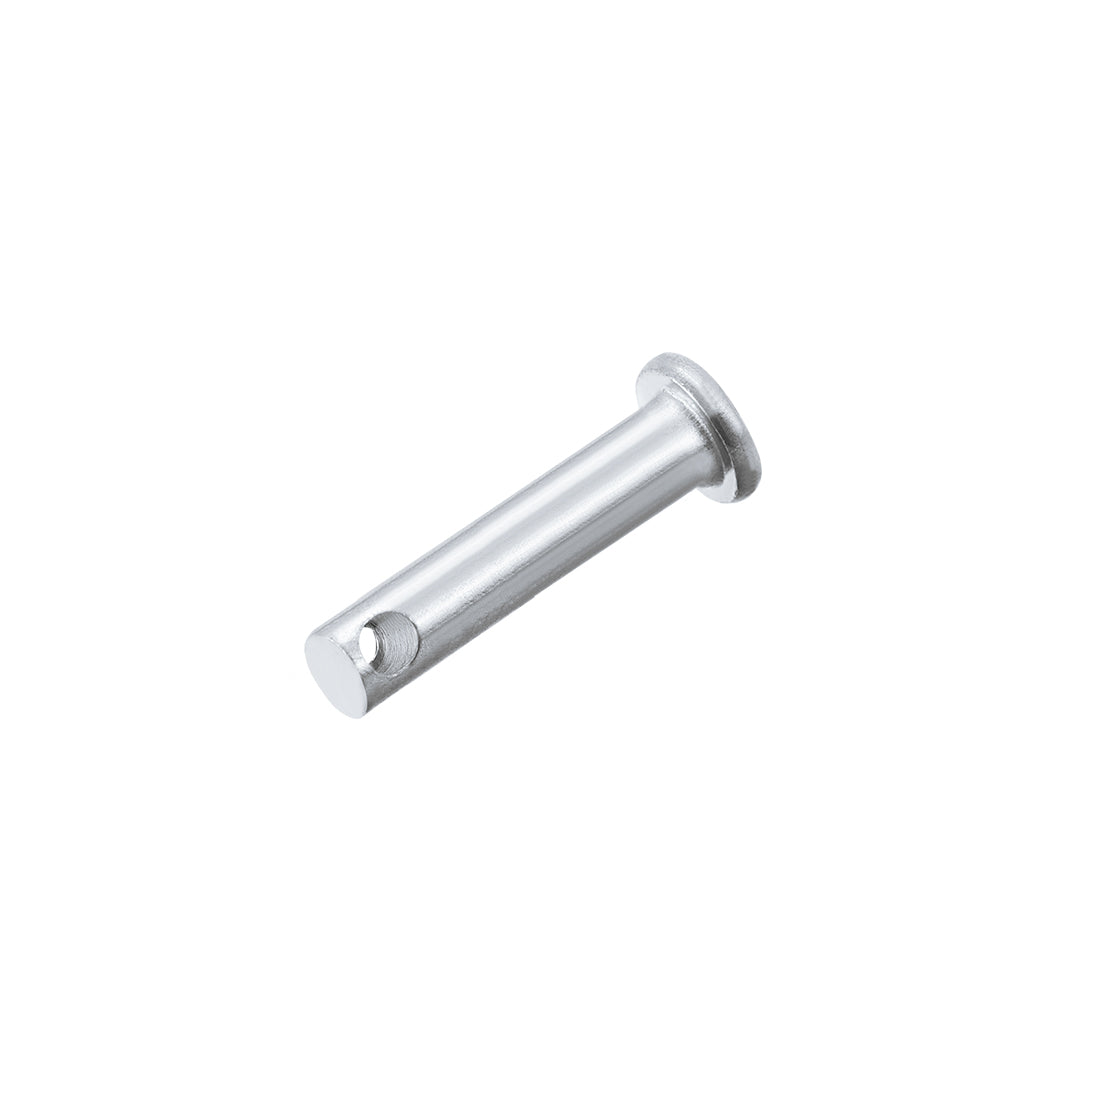 Uxcell Uxcell Single Hole Clevis Pins - 8mm x 55mm Flat Head Zinc-Plating Solid Steel Link Hinge Pin 20Pcs